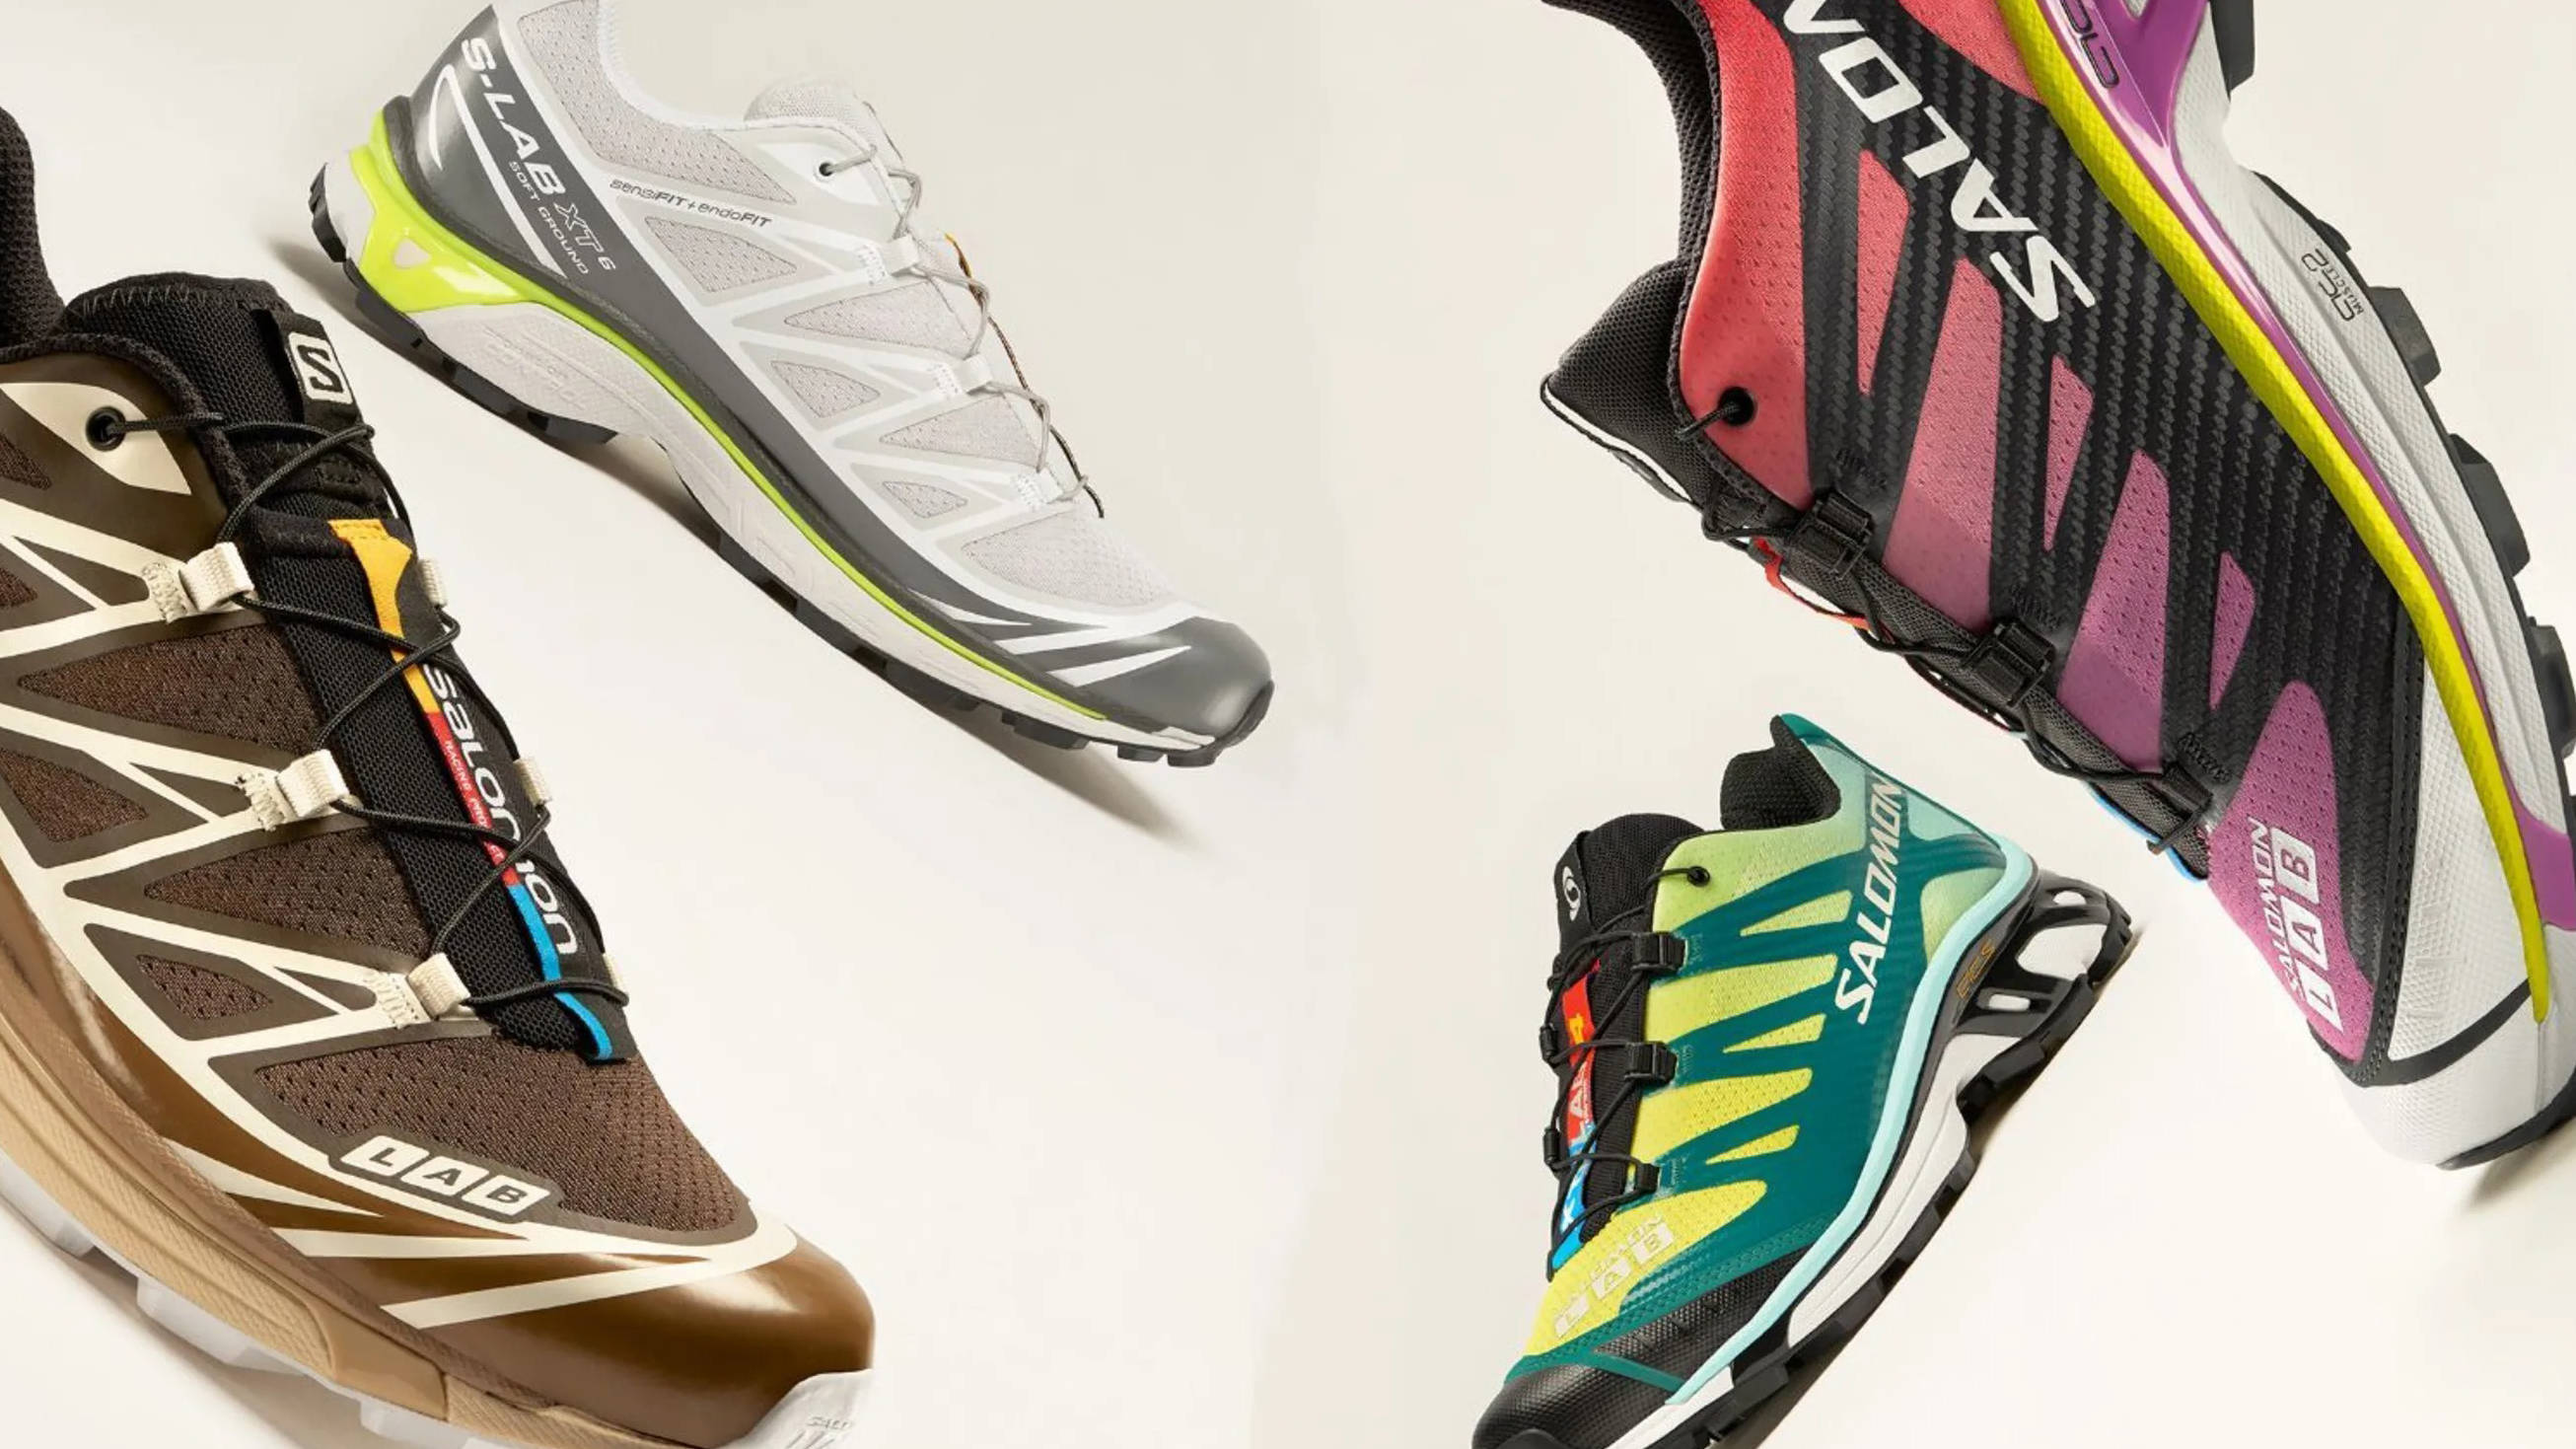 The Complete Salomon Sizing Guide | The Sole Supplier